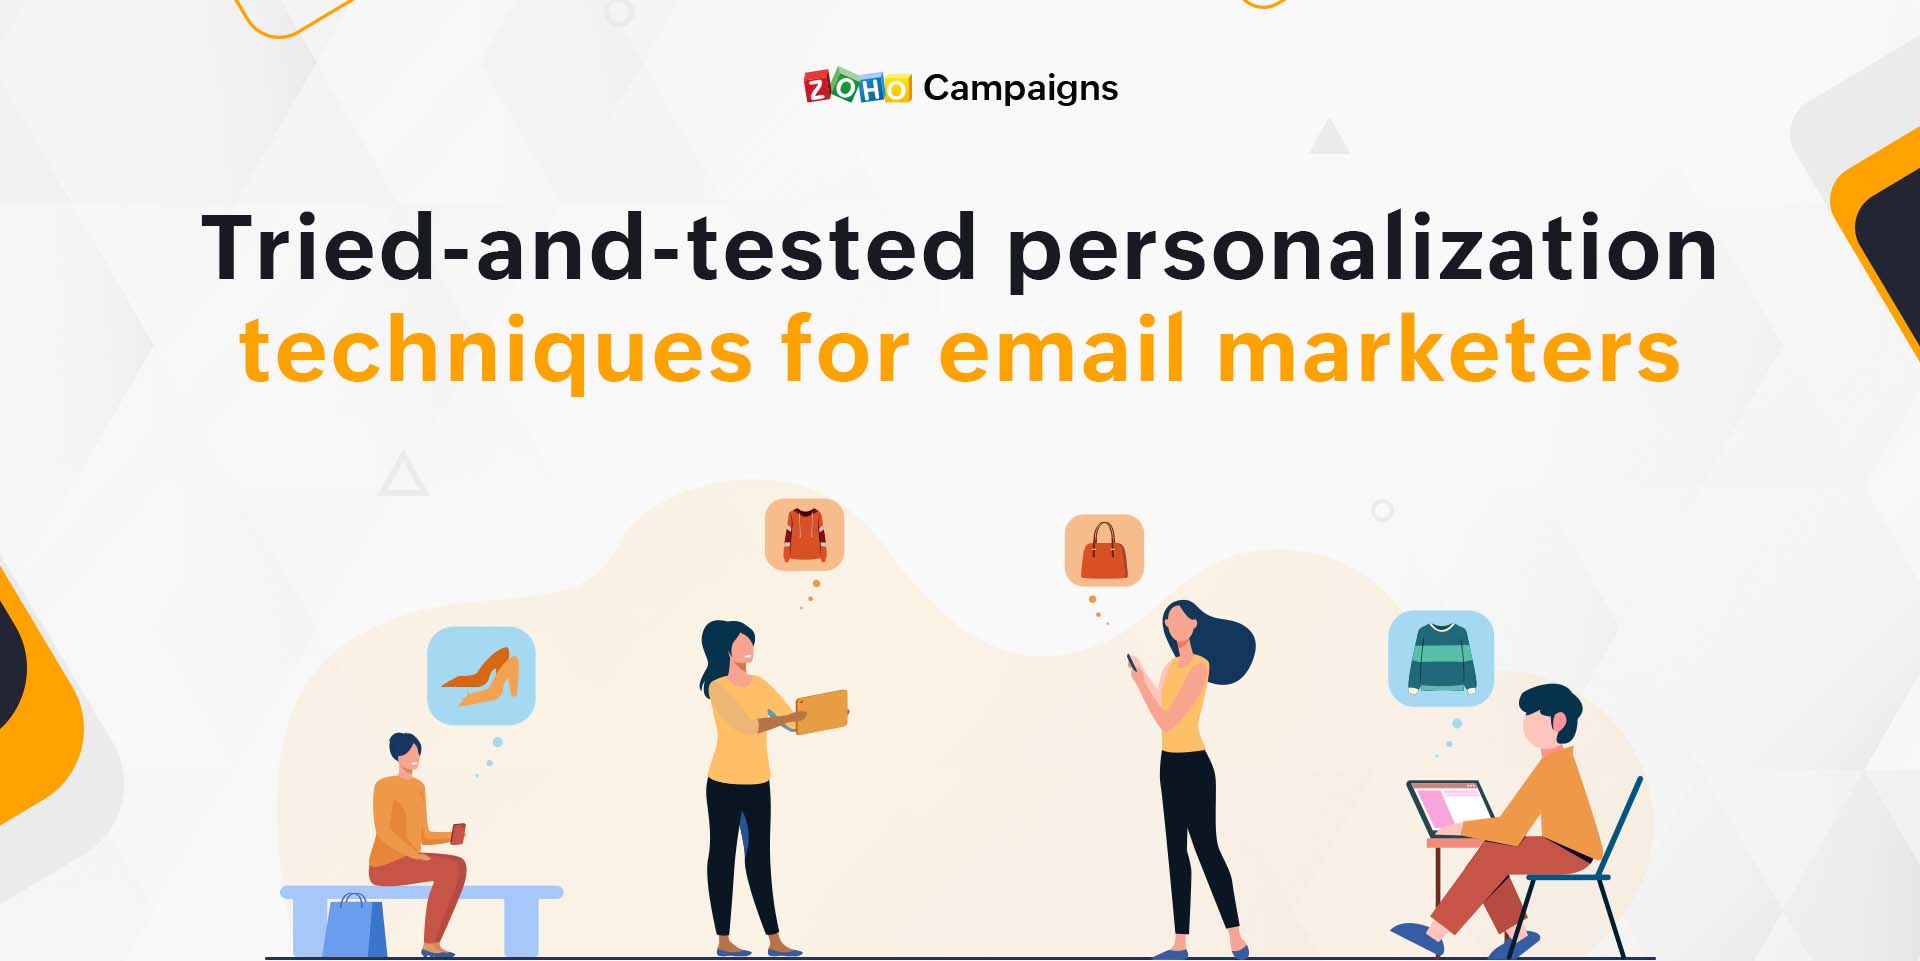 Email marketing personalization techniques